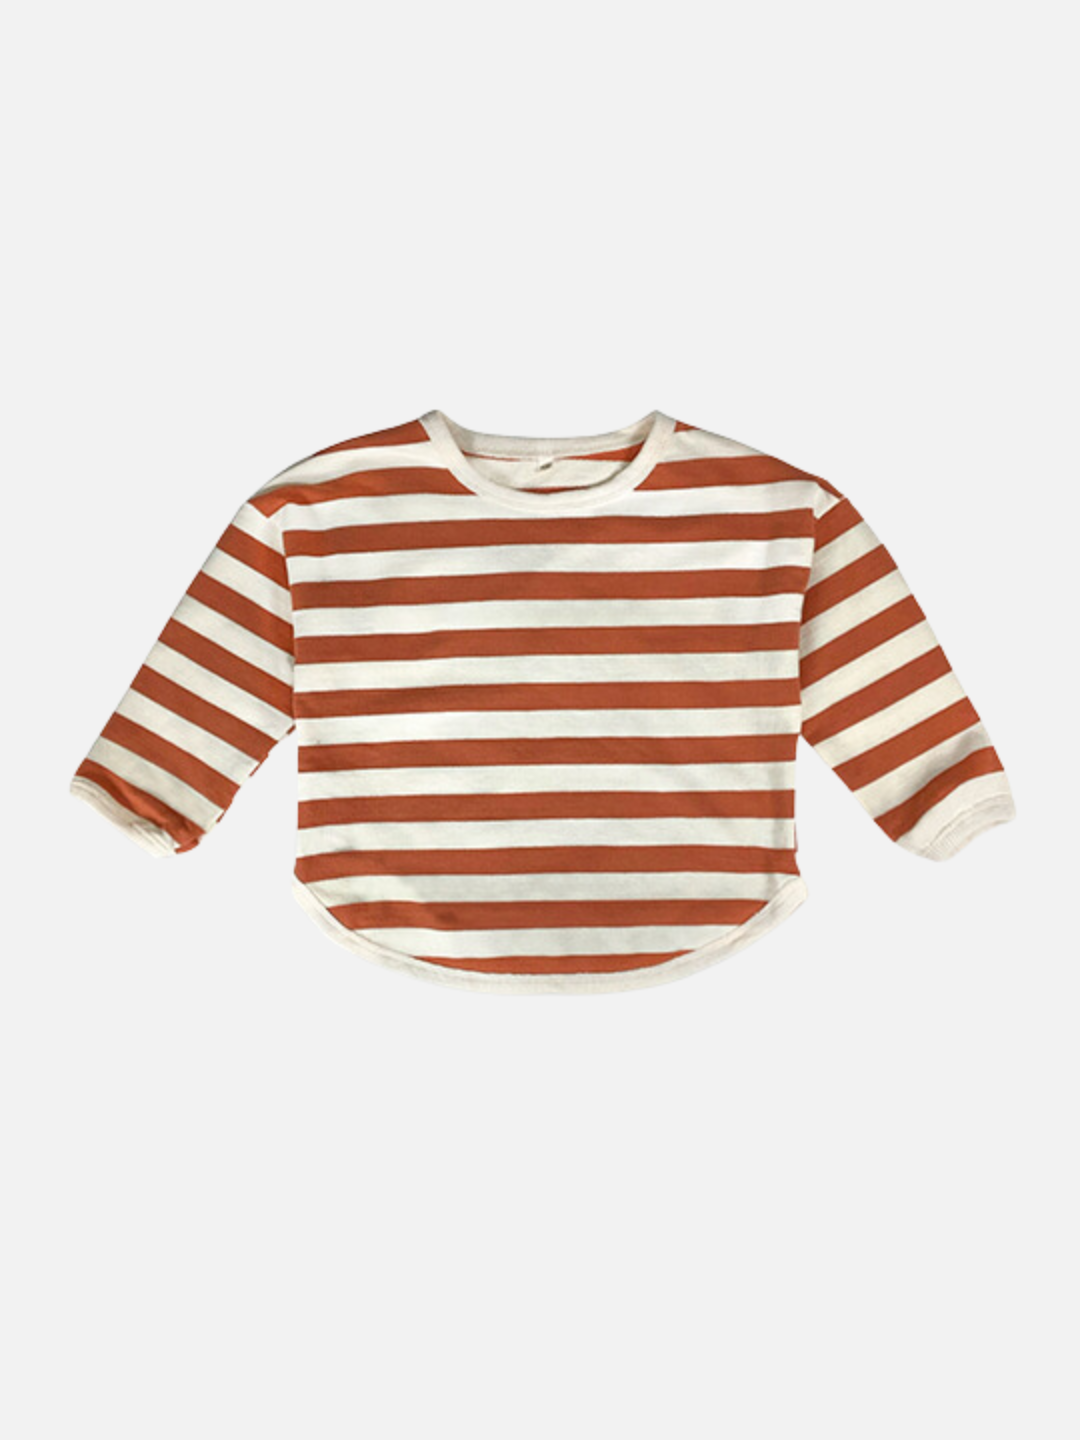 A kids' tee shirt with a curved hem in peaches and cream